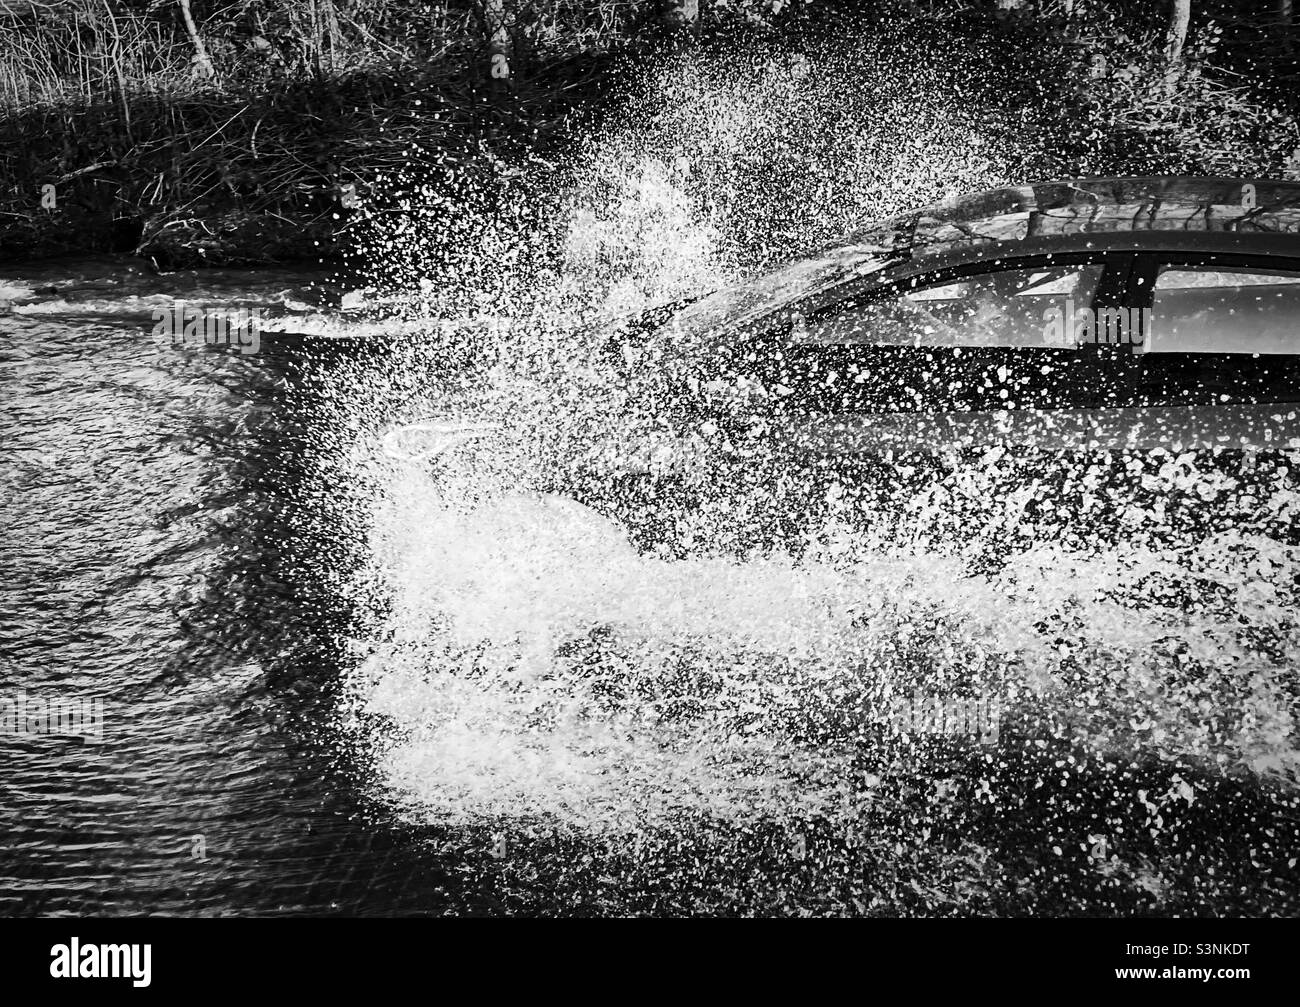 ‘Going for it!’ A motorists decides that they are putting their foot to the floor and driving through the flooded road ahead (Black & White) Stock Photo